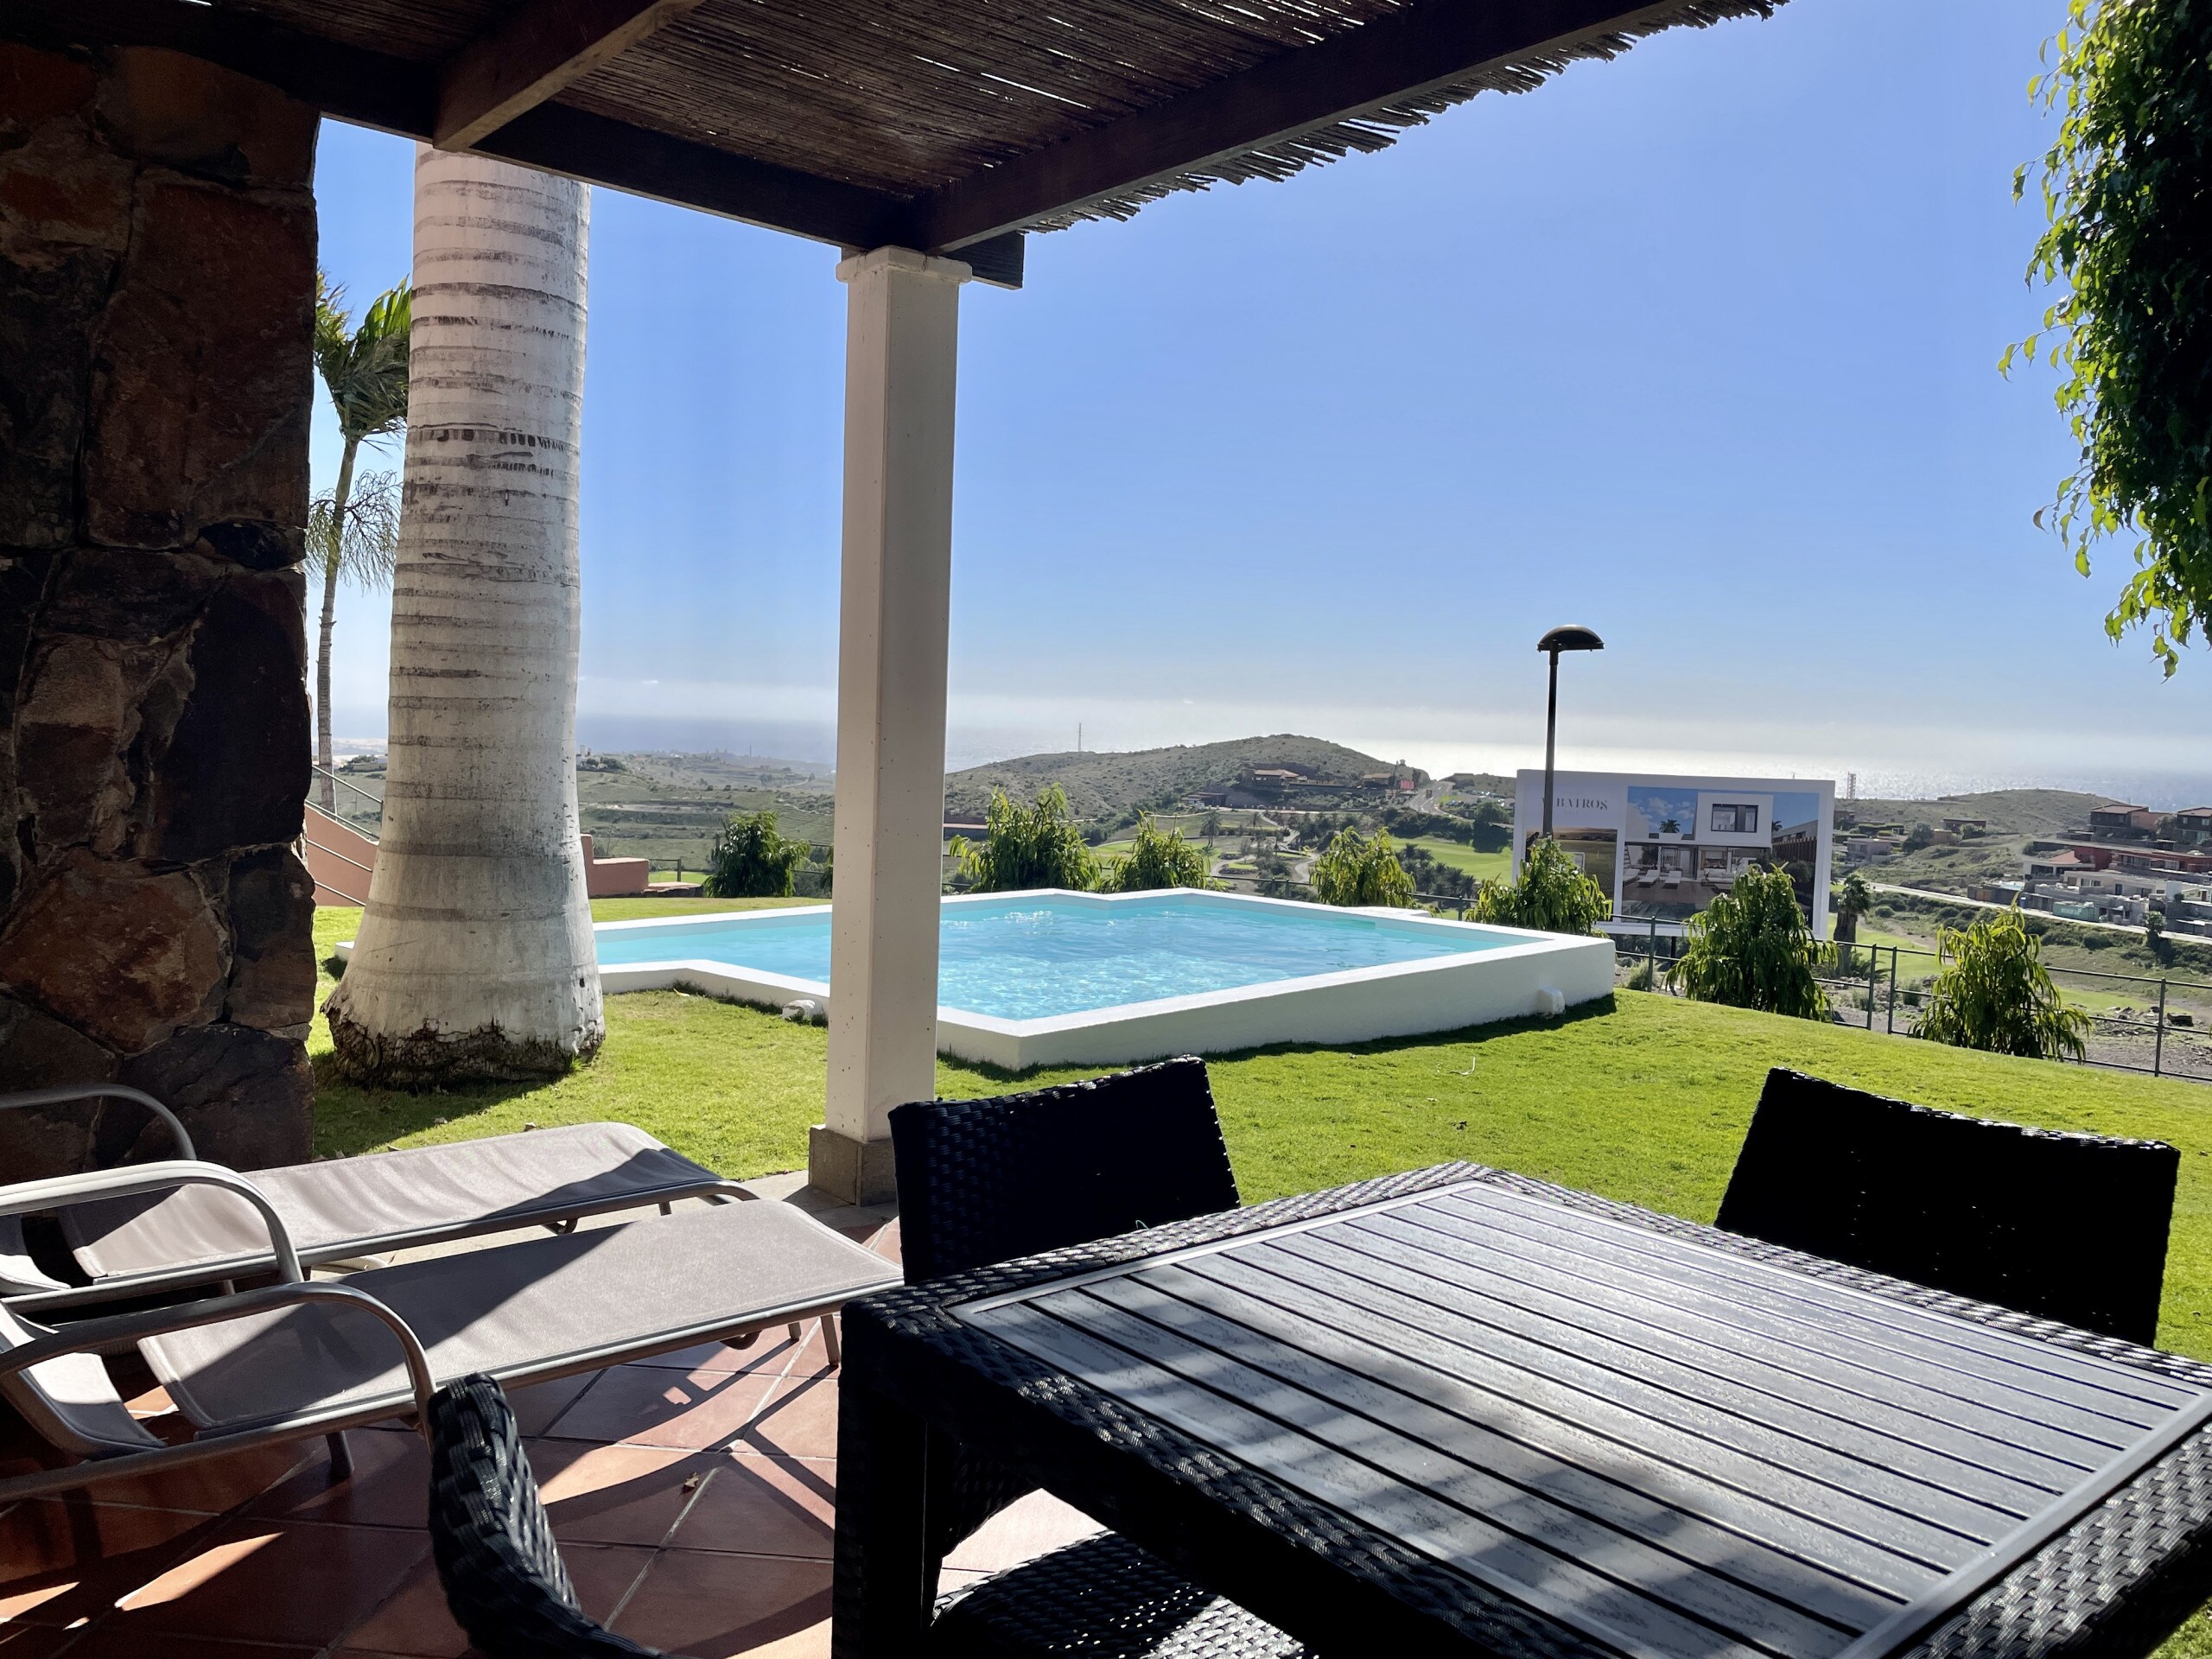 Property Image 2 - Villa 5 in Salobre Golf with private pool, garden and great views